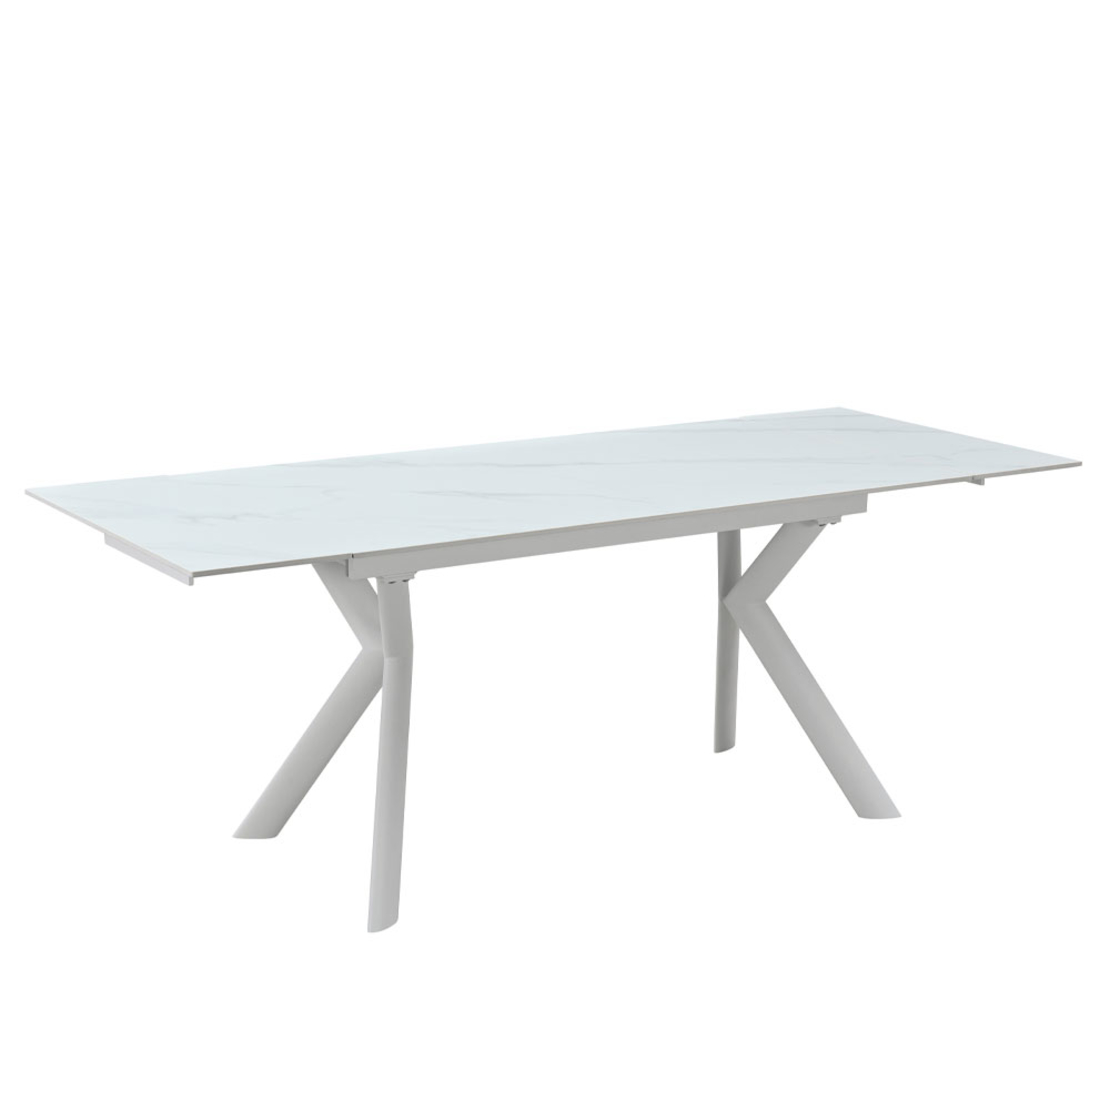 KIRA TABLE EXTENDABLE SINTERED STONE WHITE WITH MARBLE PATTERN METAL WHITE PRC